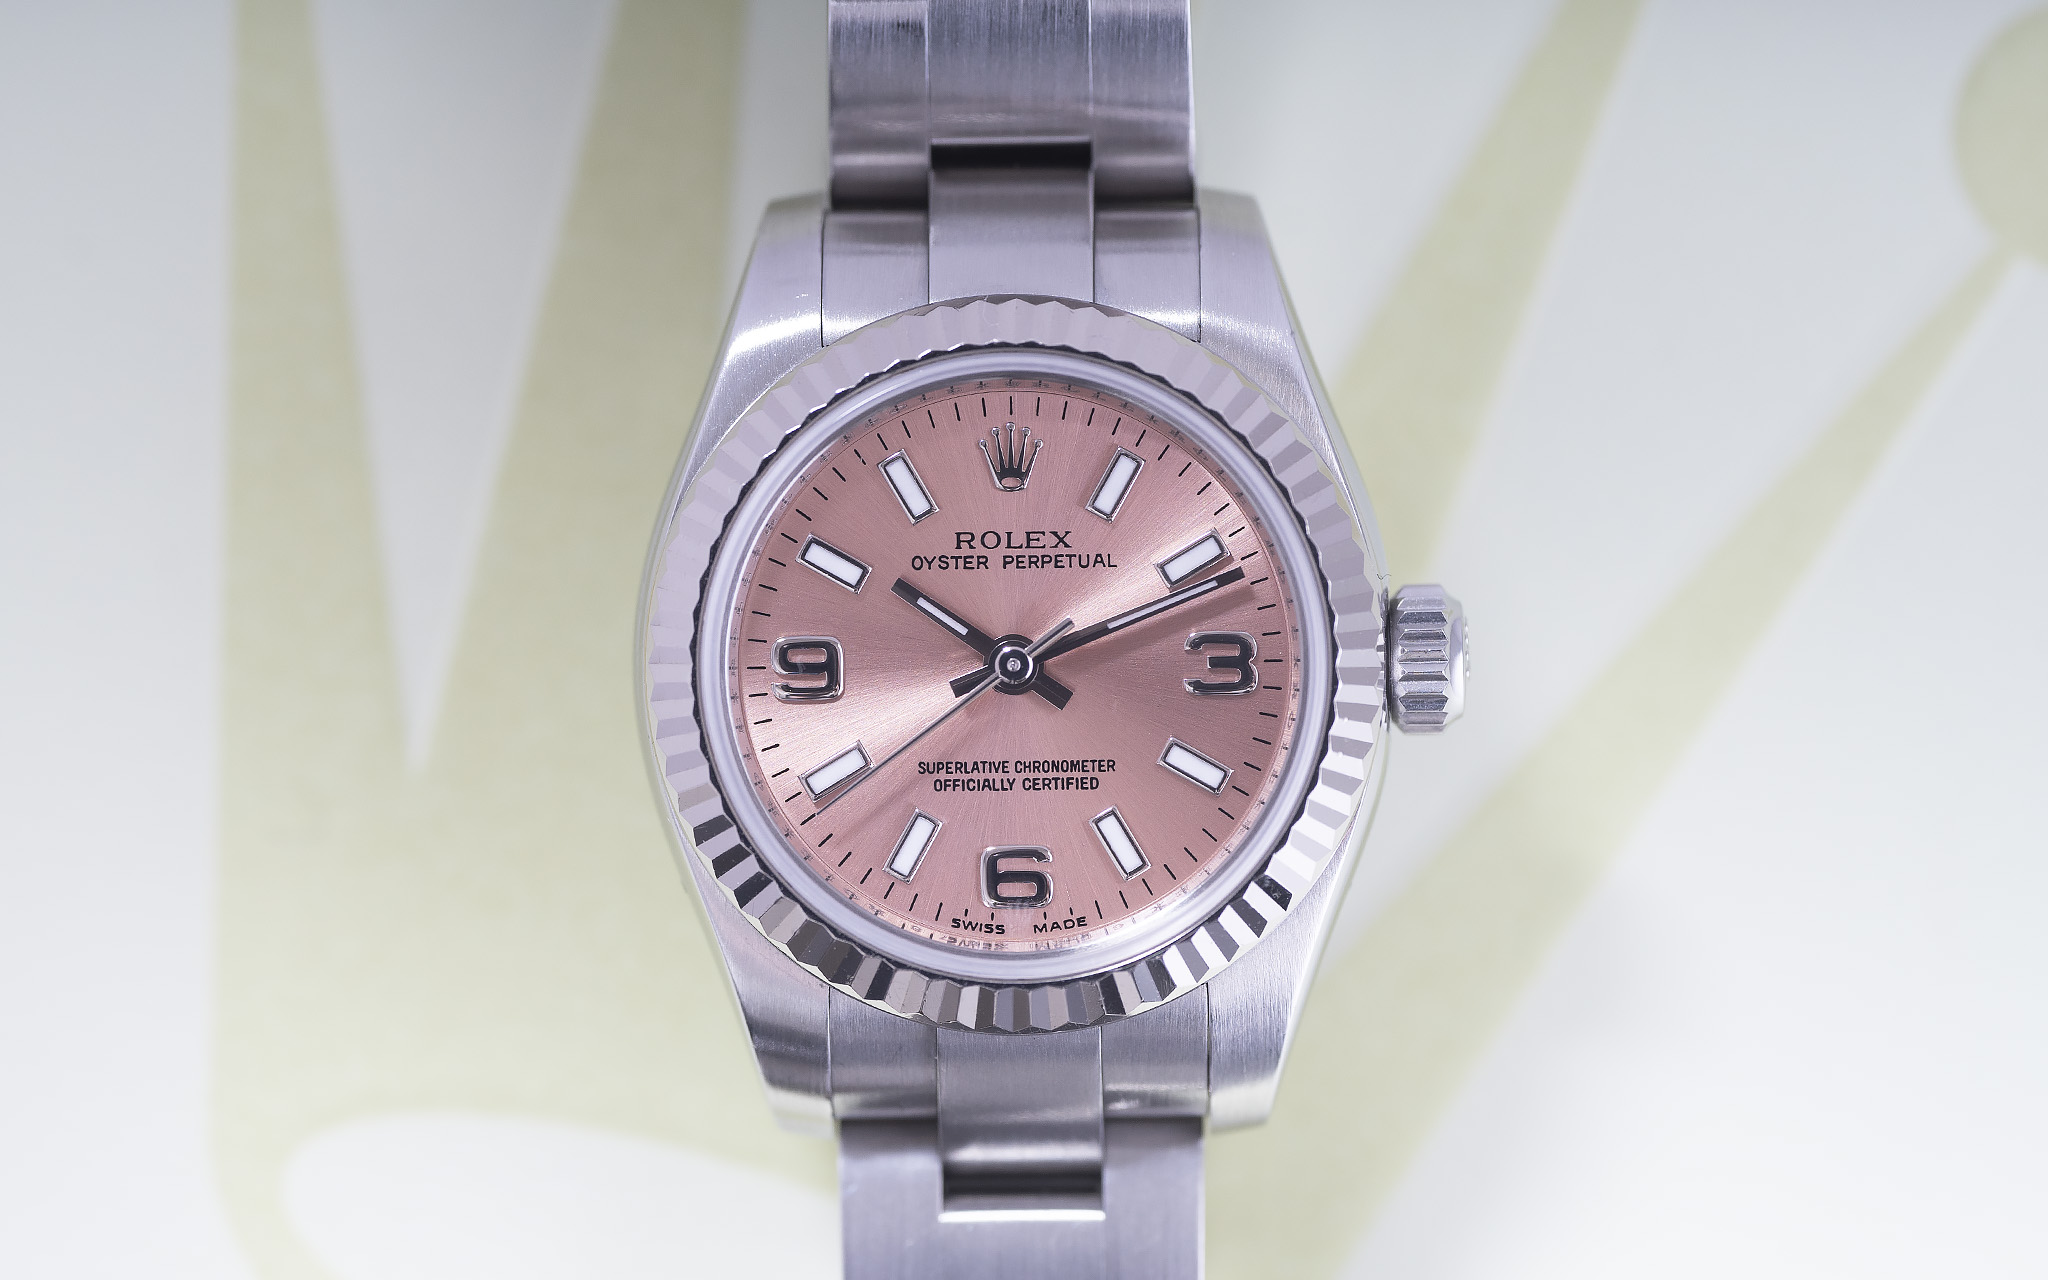 ROLEX OYSTER PERPETUAL 176234